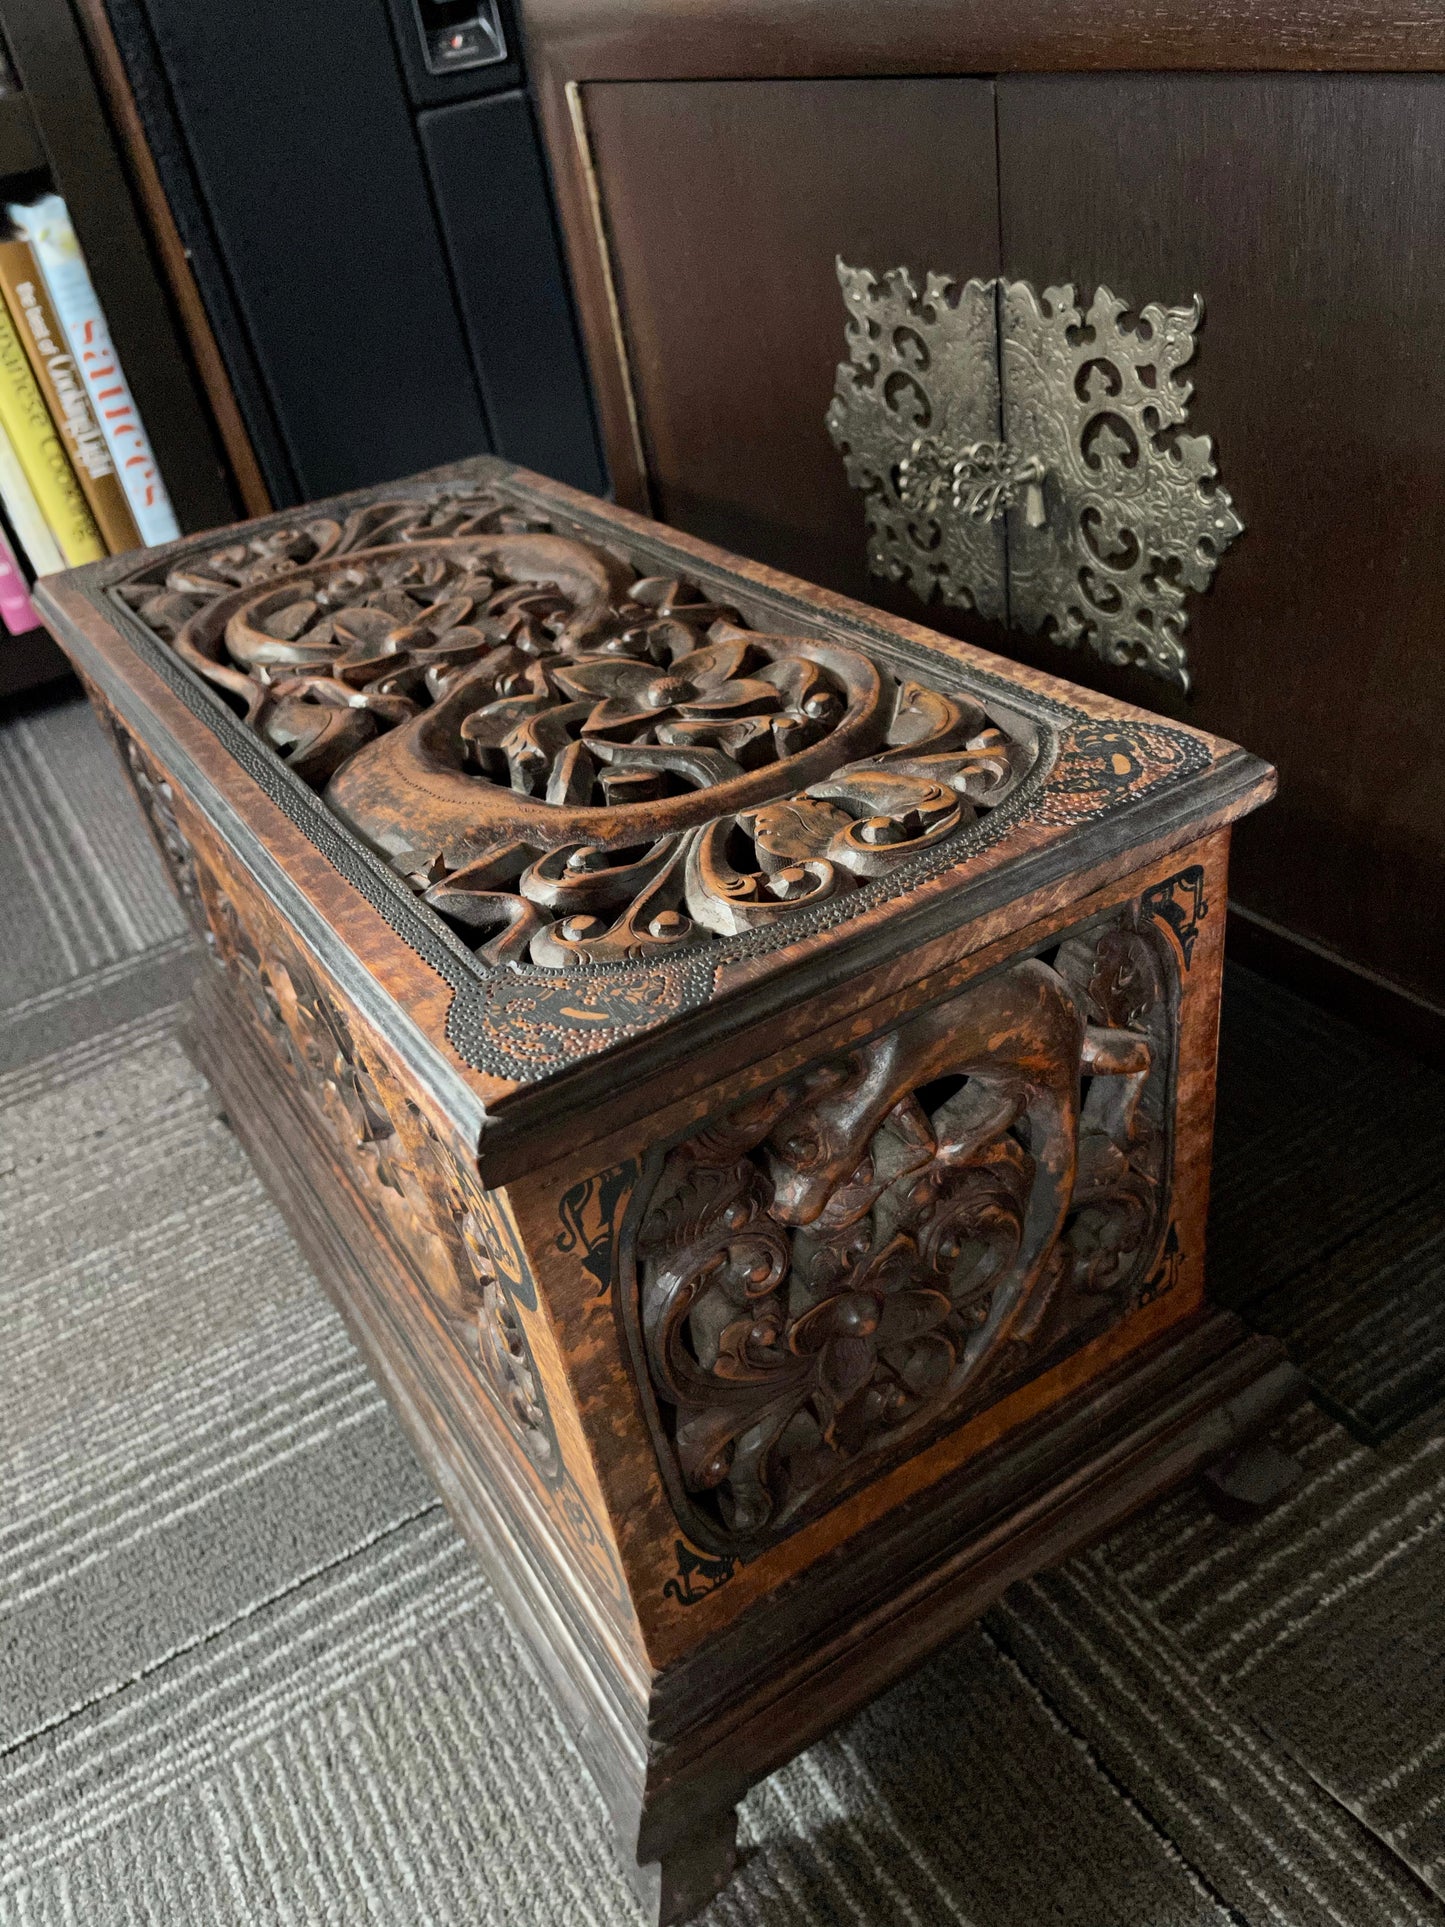 FABULOUS Vintage Ornate Trunk from Indonesia, Old World Vintage